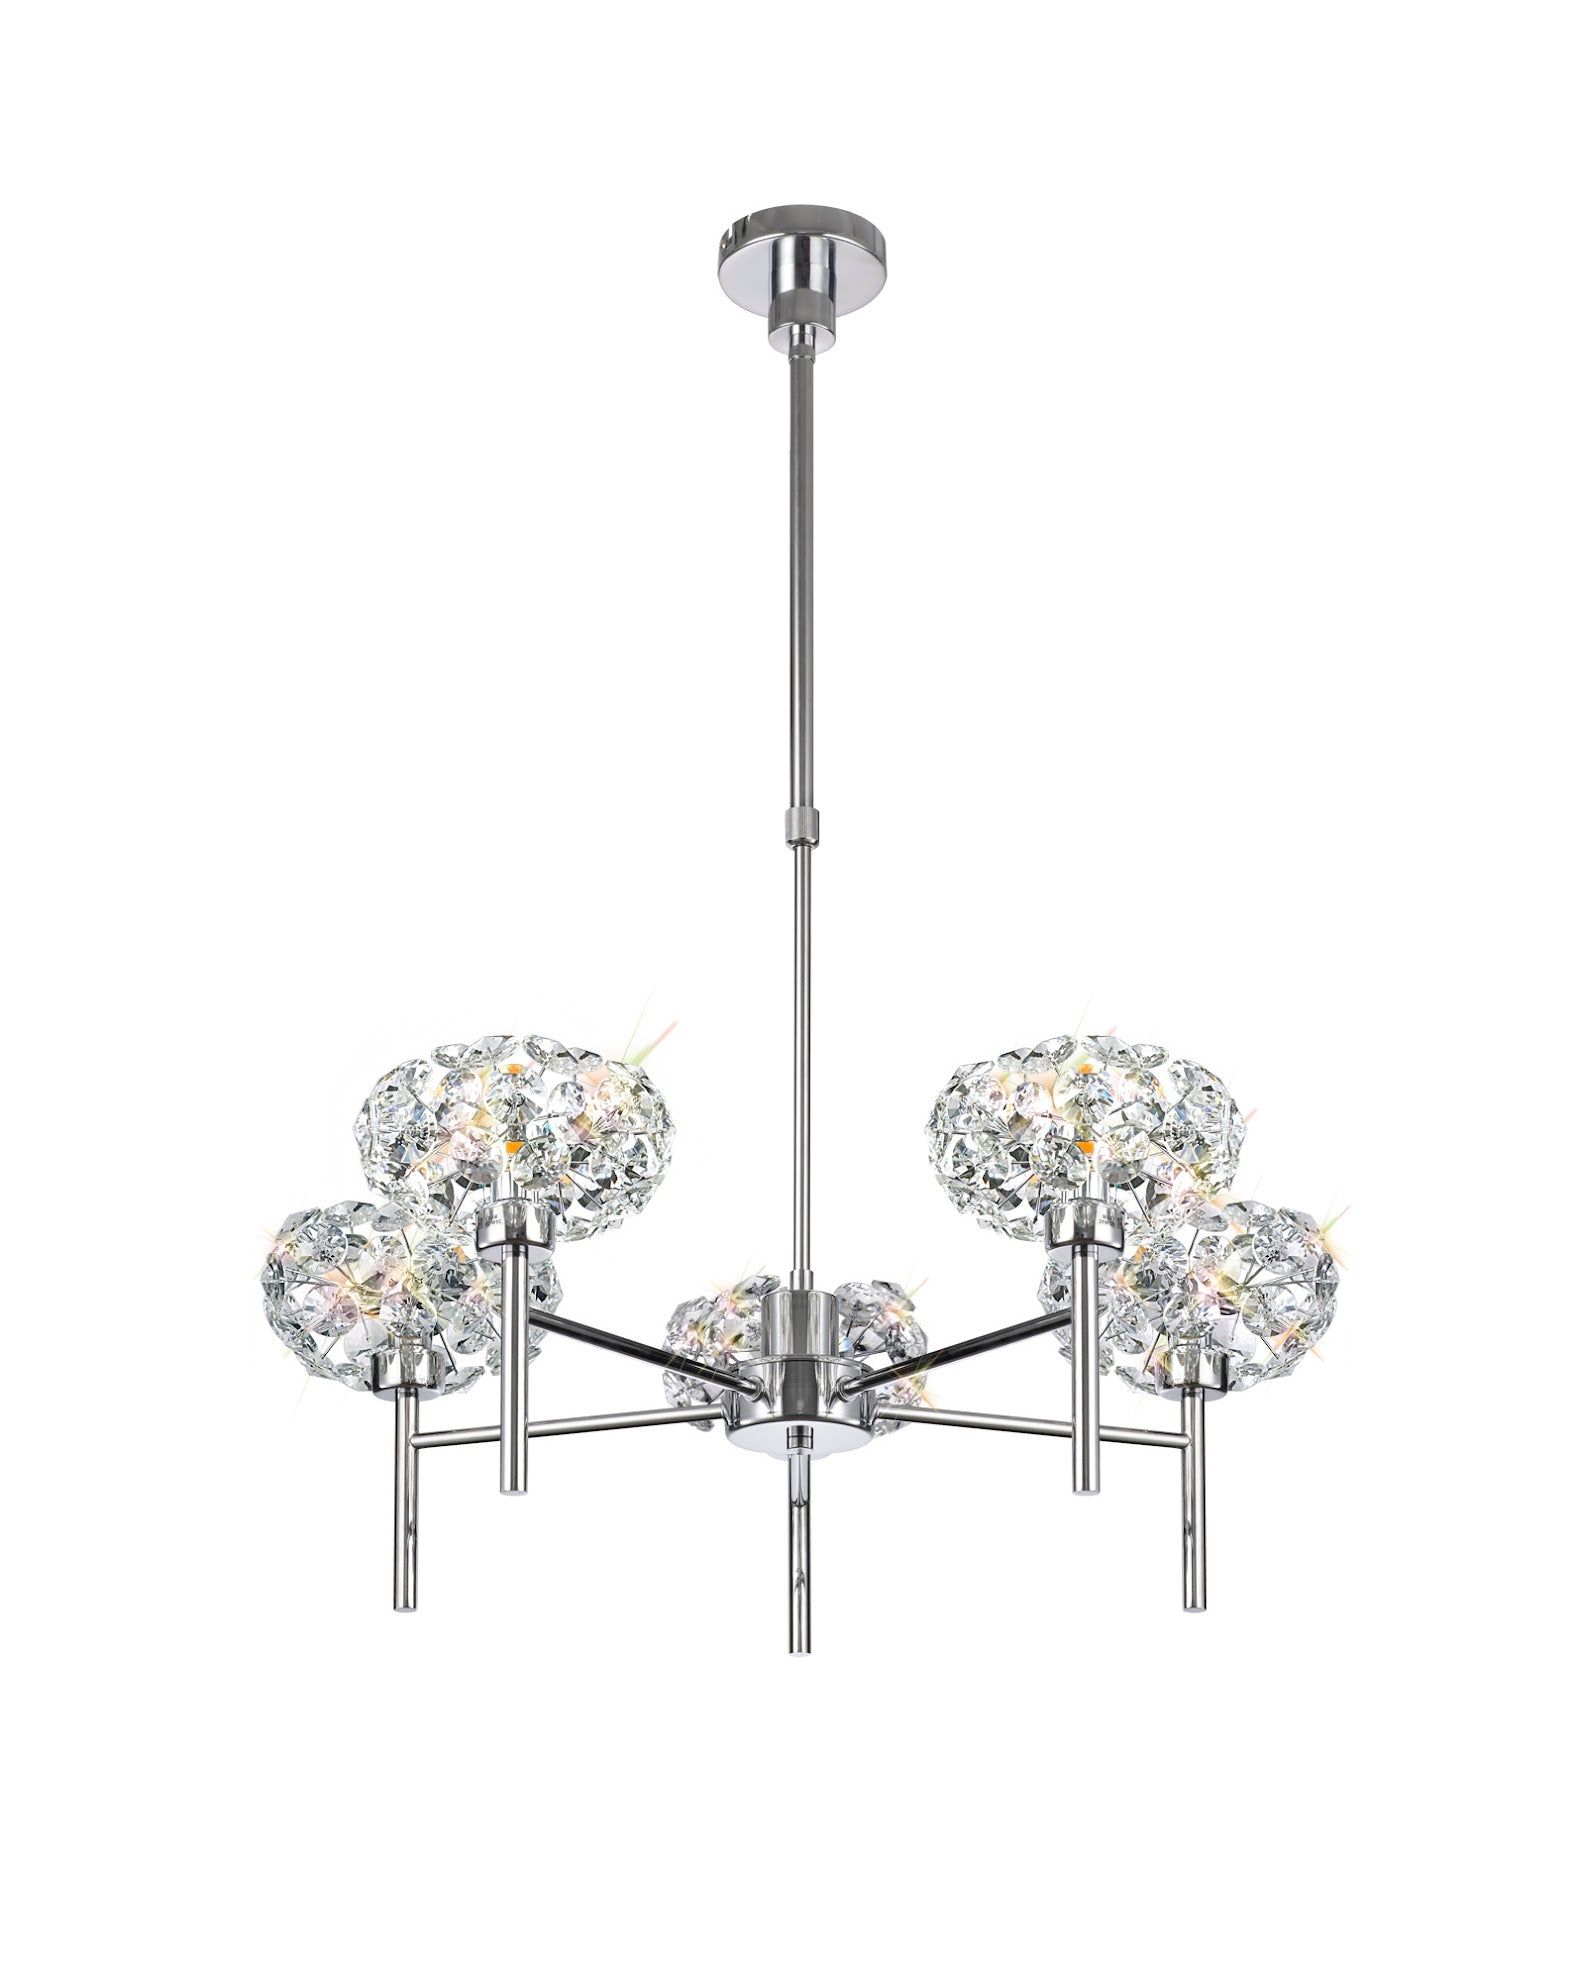 Cassis/Sophia 5 Light G9 Telescopic Light With Polished Chrome And Crystal Shade